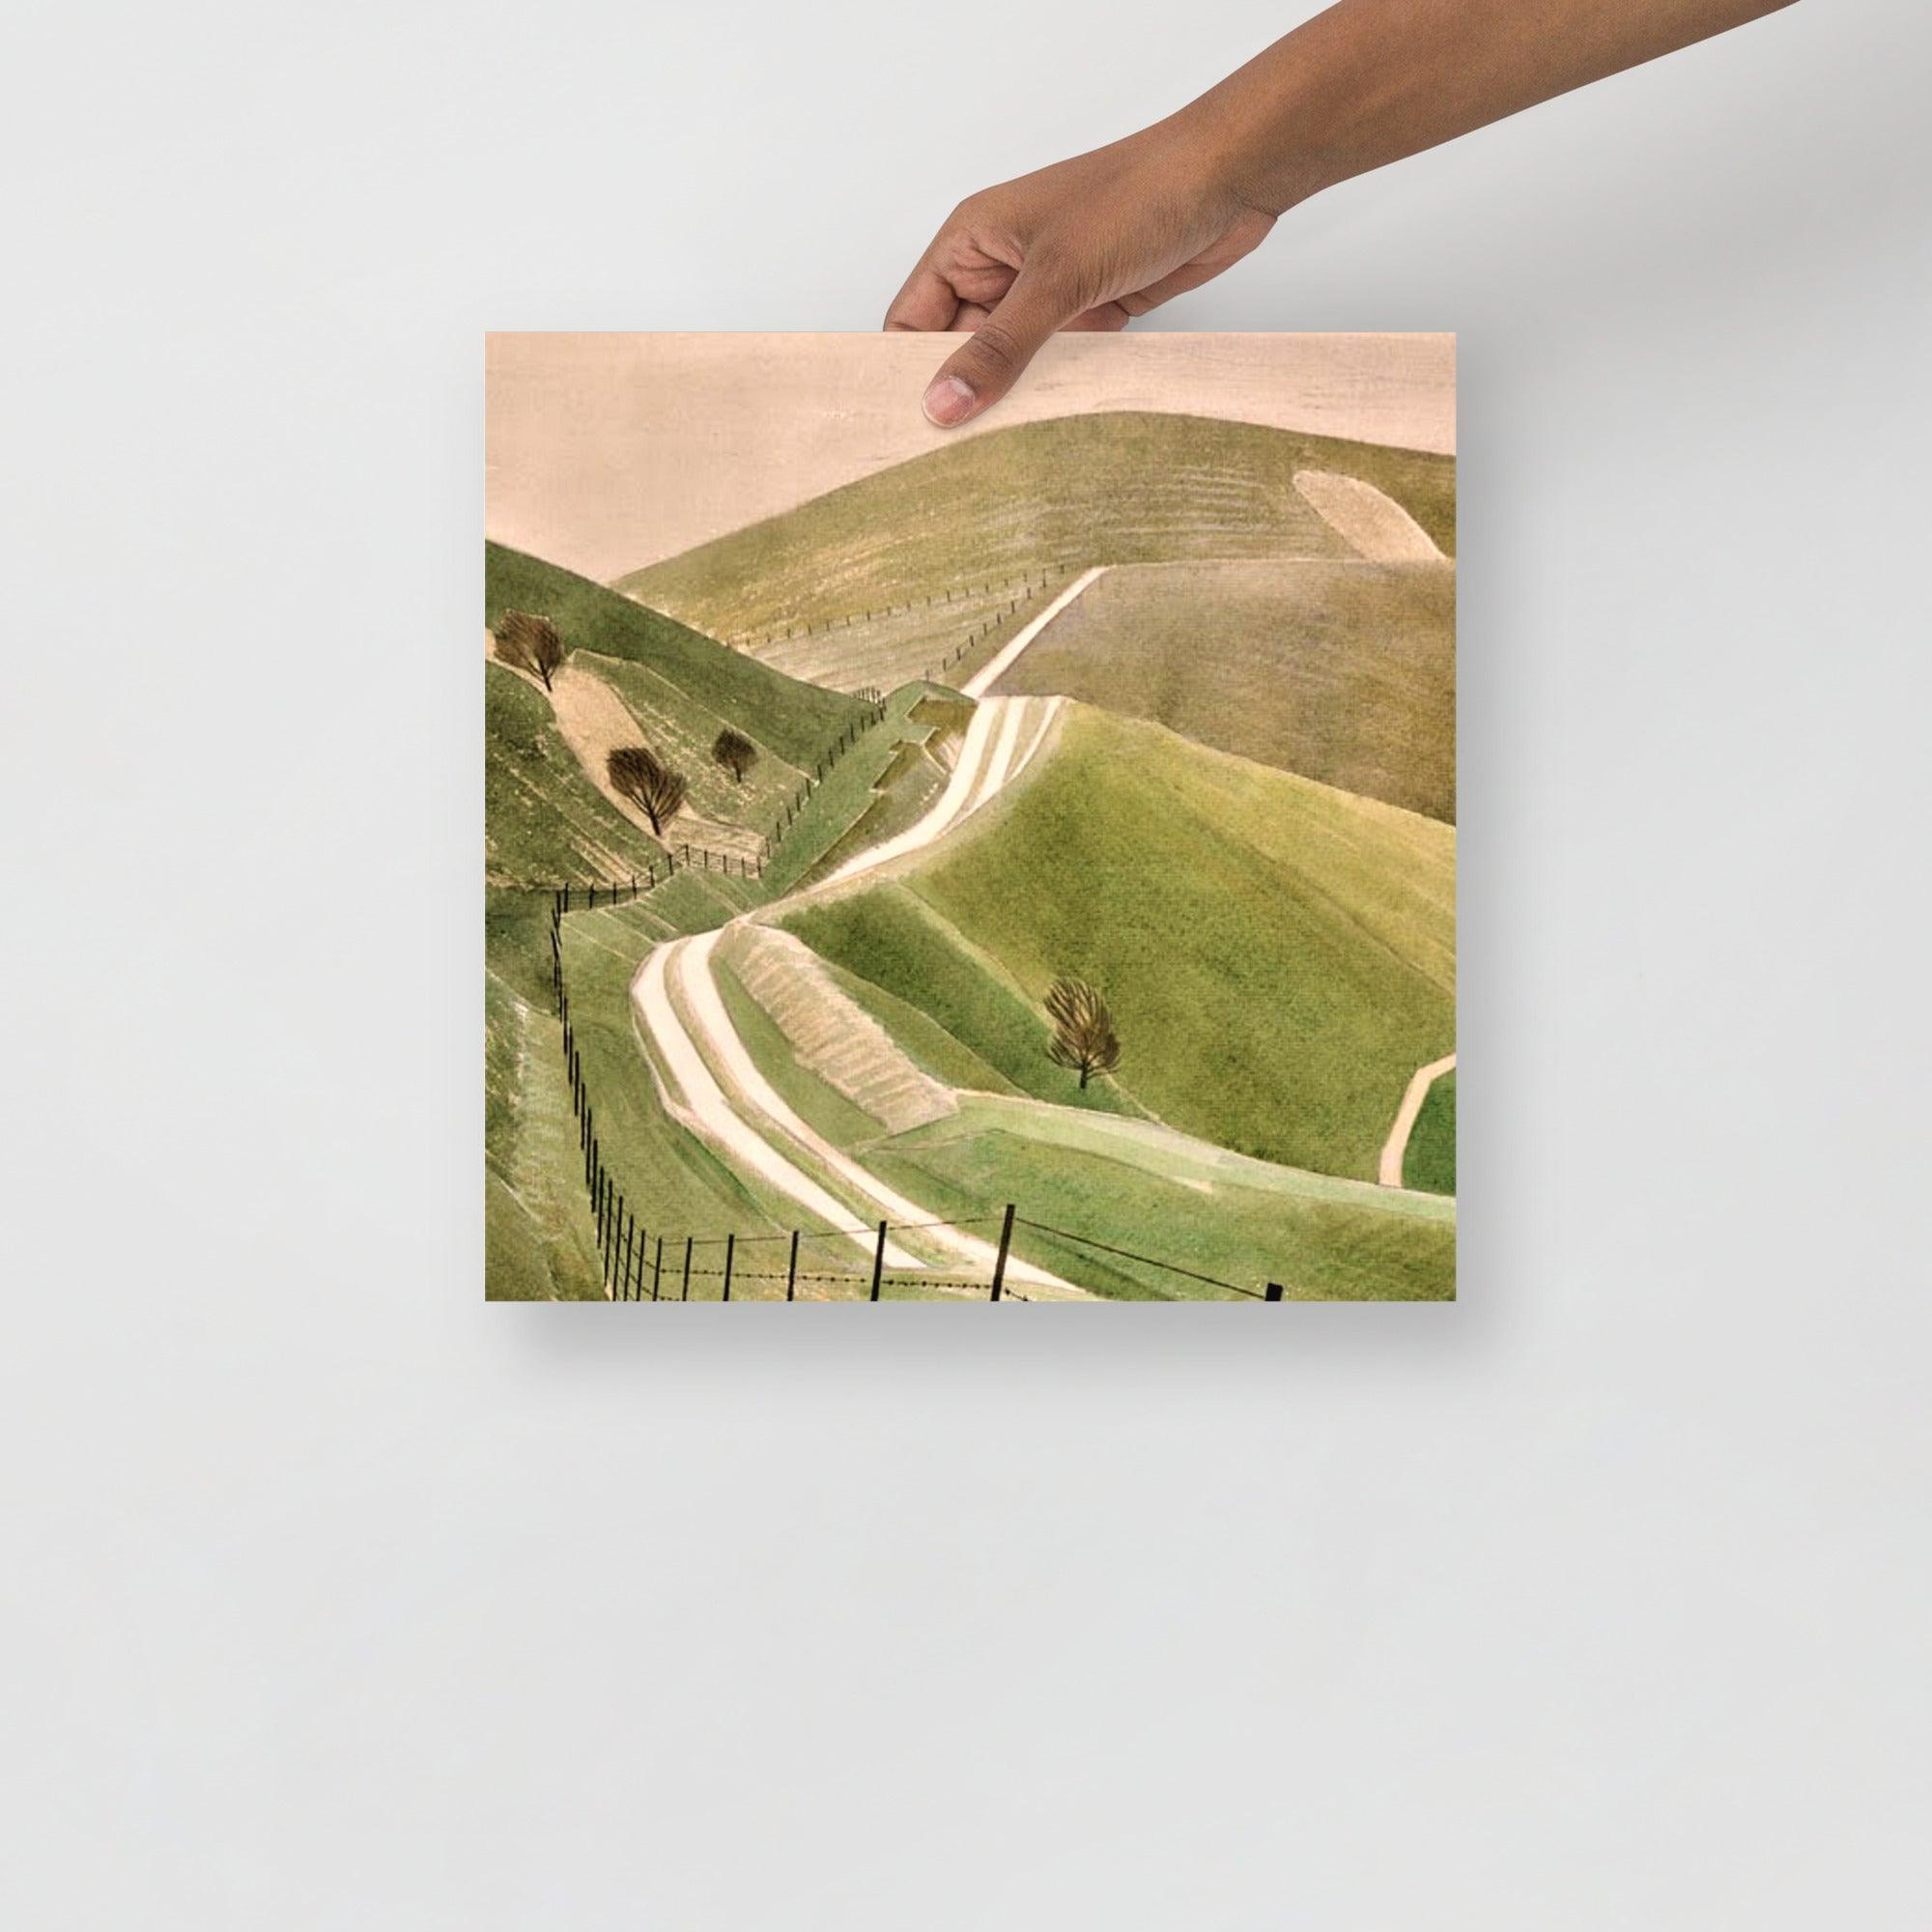 A Chalk Paths by Eric Ravilious poster on a plain backdrop in size 14x14”.